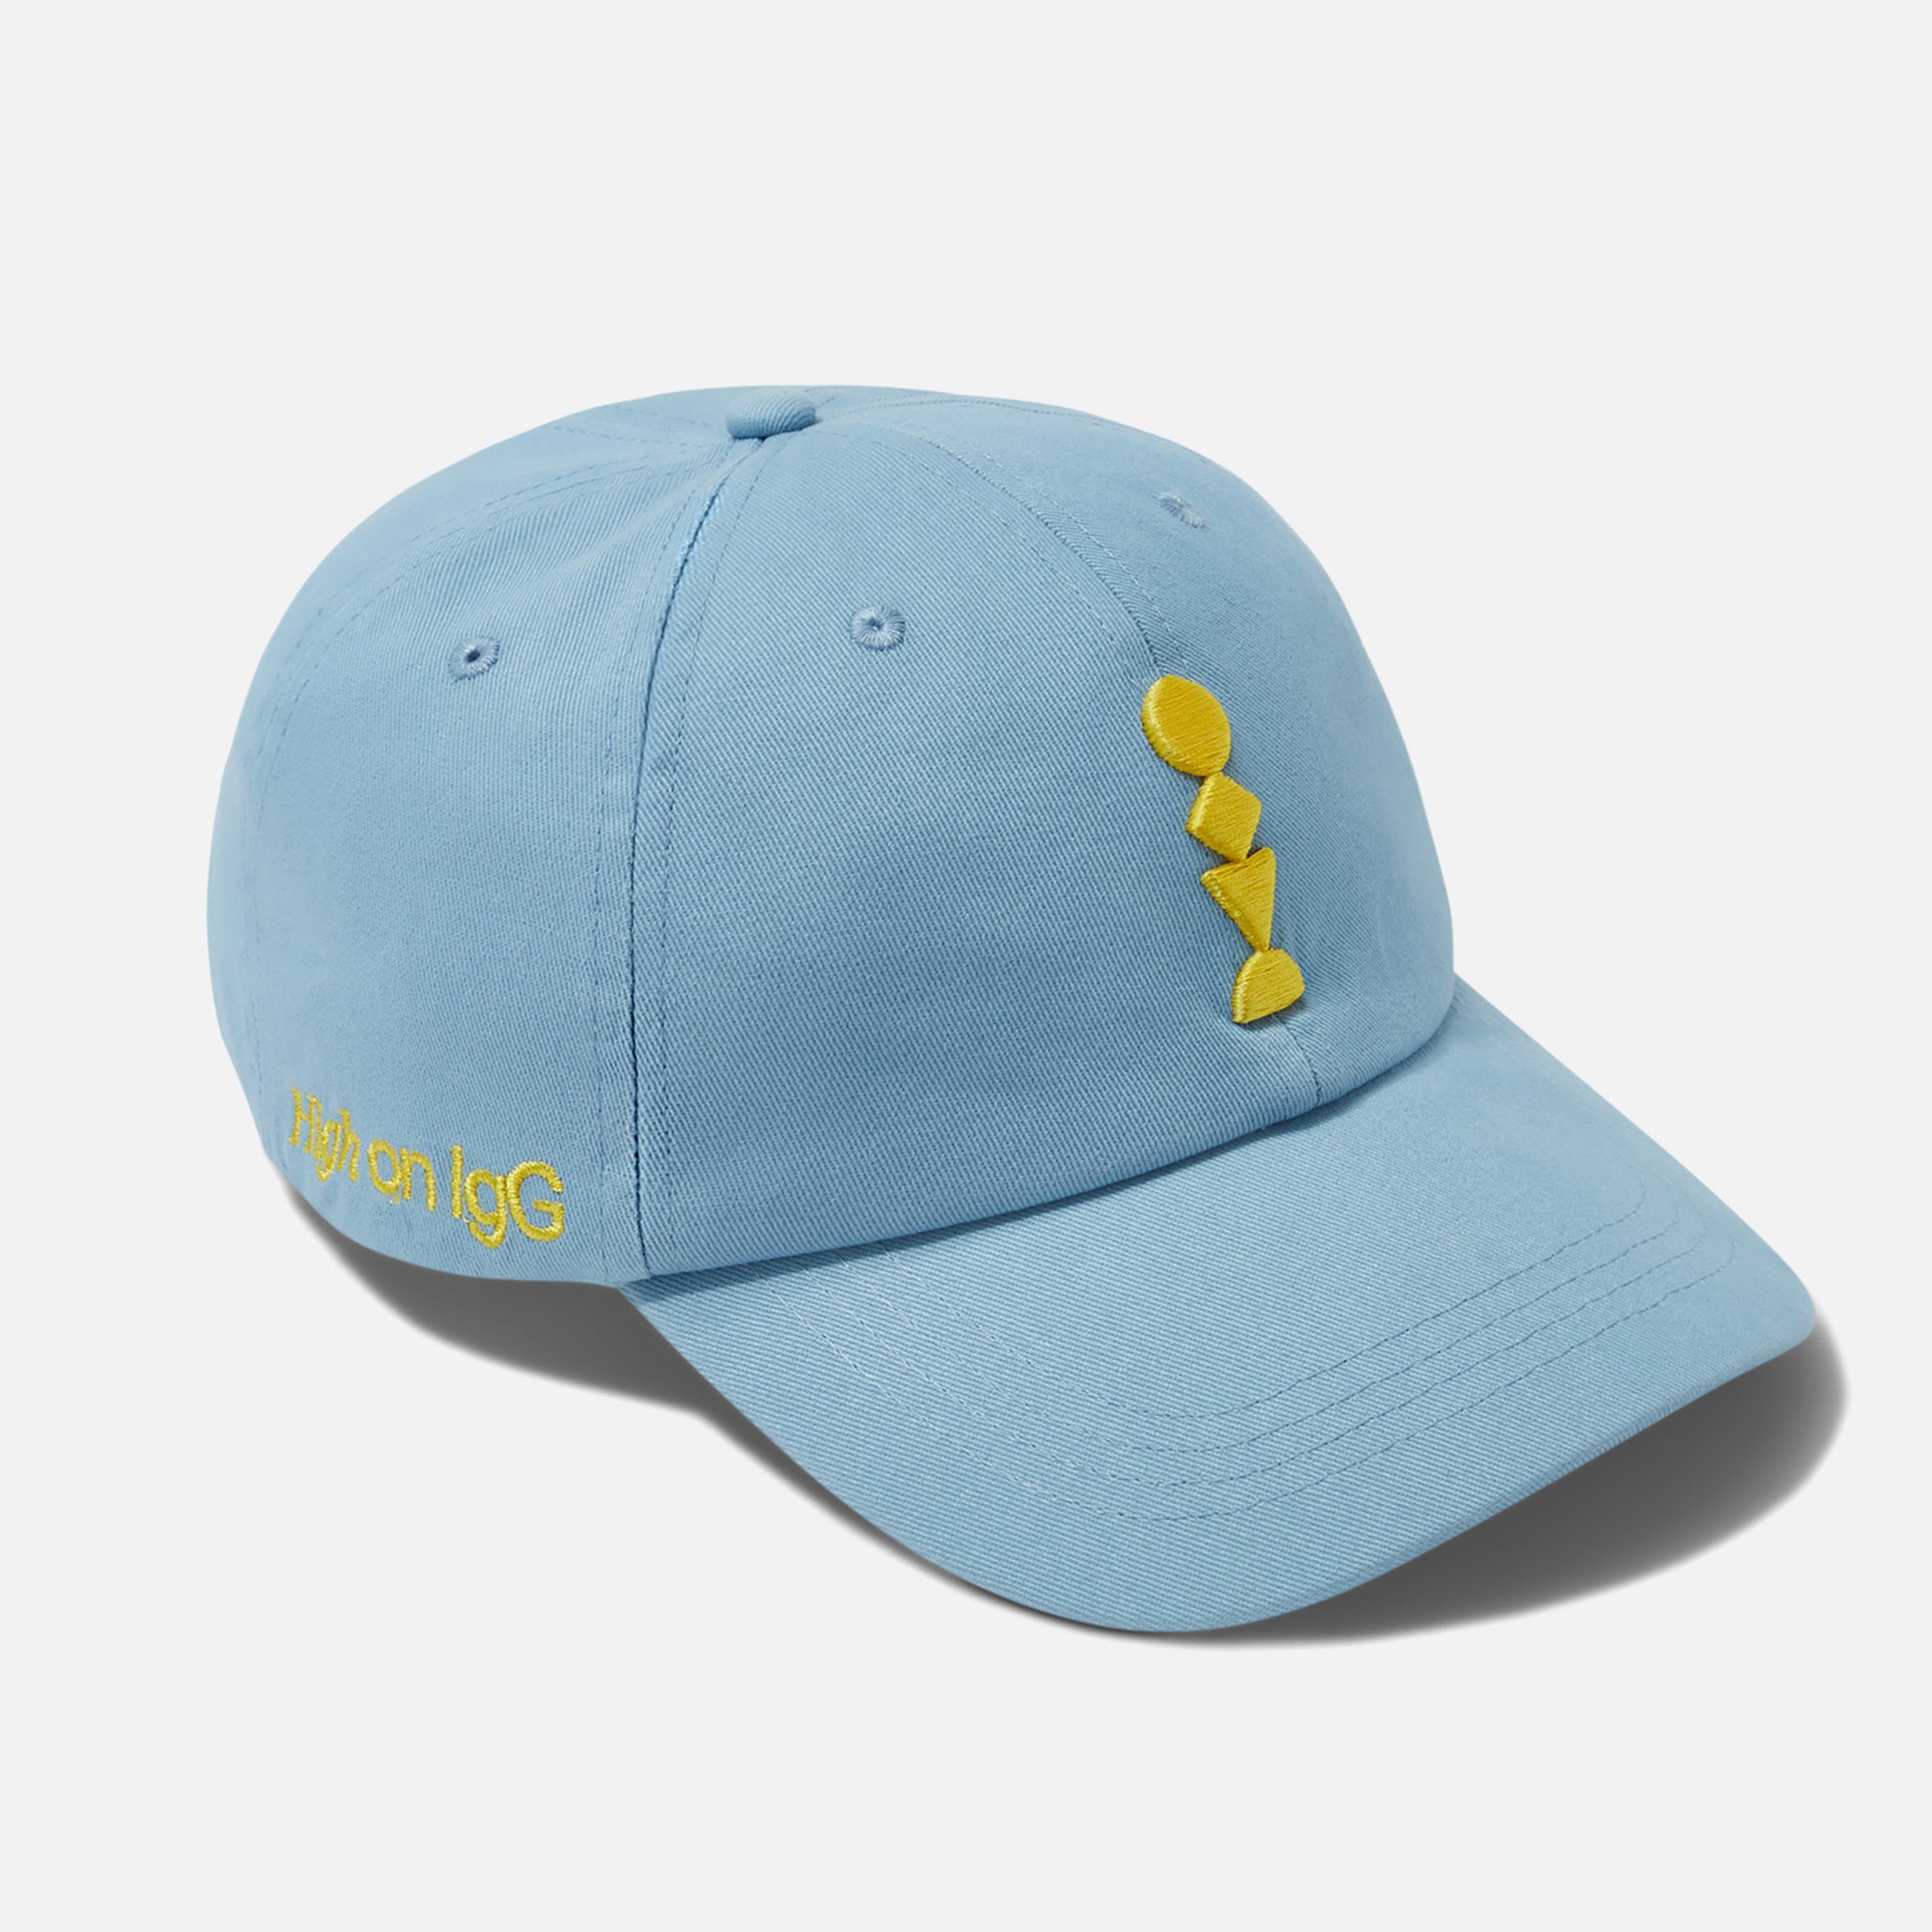 Blue Baseball Cap with a Yellow Embroidered Design reading "High on IgG" on a White Background